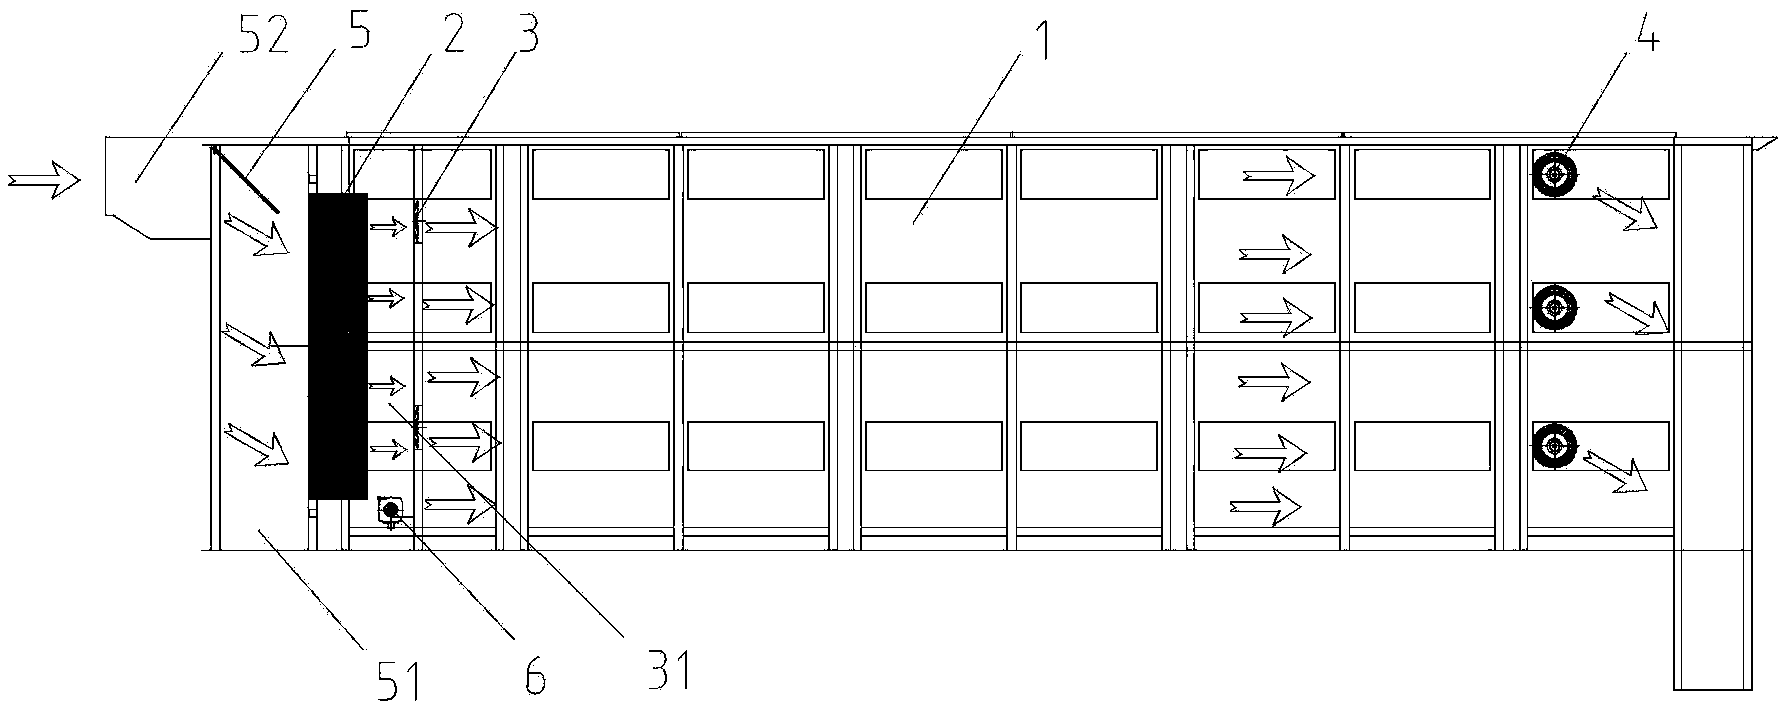 Full-sealed compartment used for conveying livestock and carrier vehicle provided with compartment